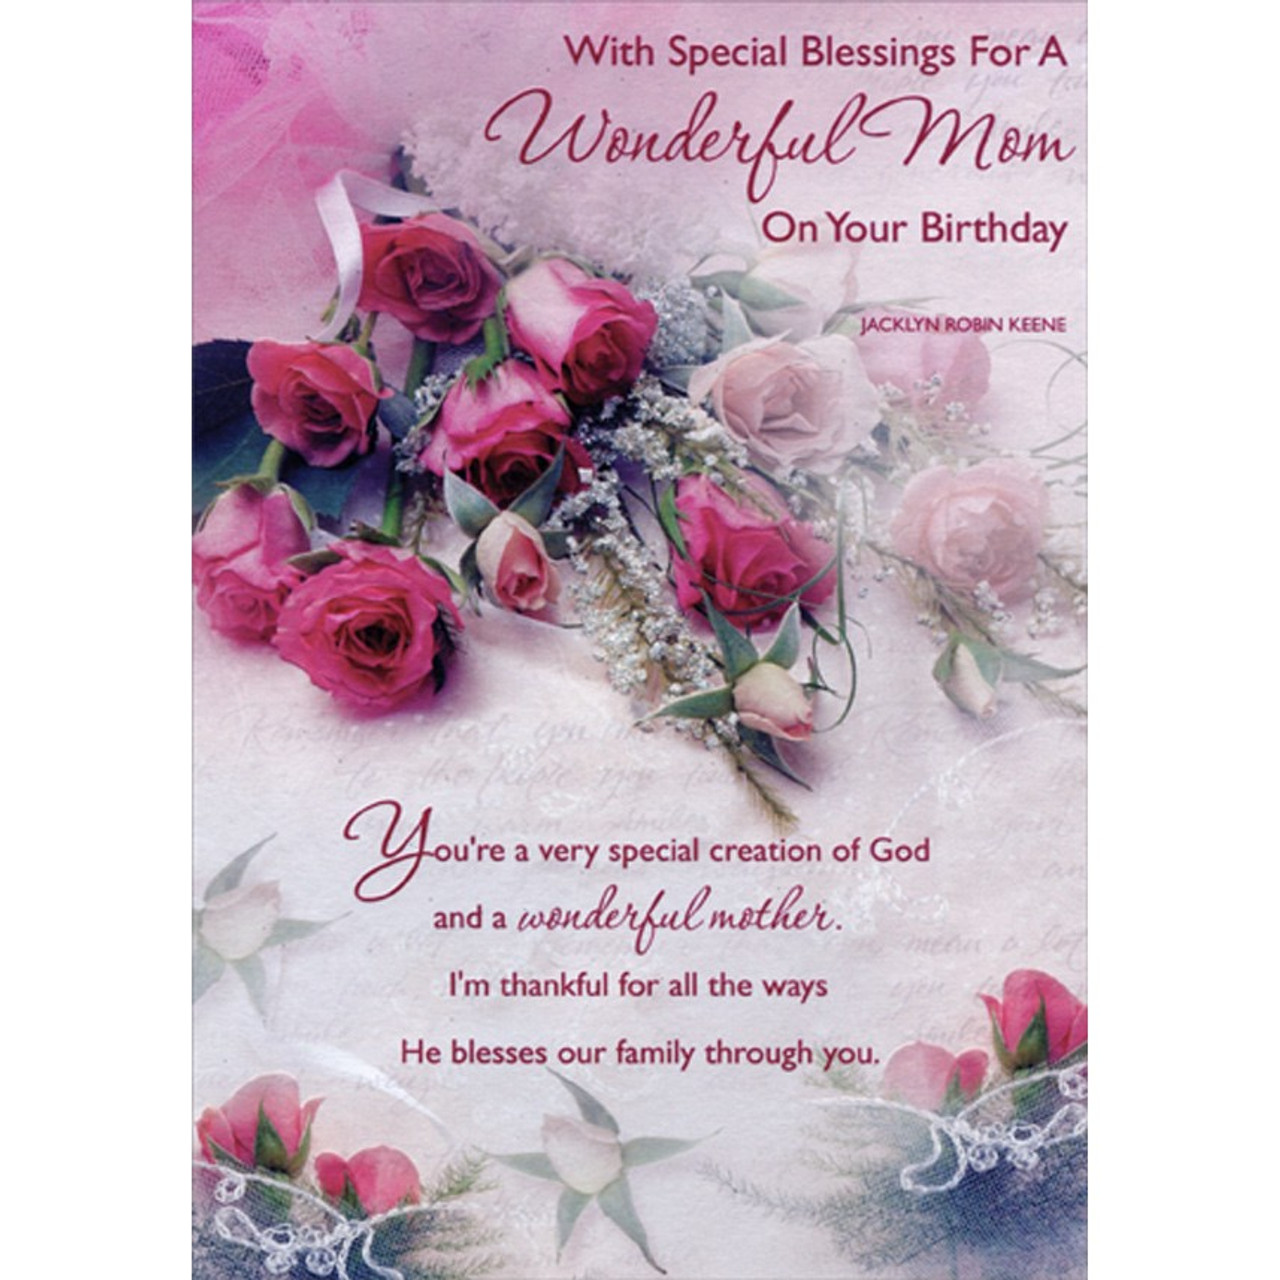 https://cdn11.bigcommerce.com/s-o3ewkiqyx3/images/stencil/1280x1280/products/3619/7588/cd14270-pink-roses-special-blessings-mom-birthday-card__58073.1656345117.jpg?c=1